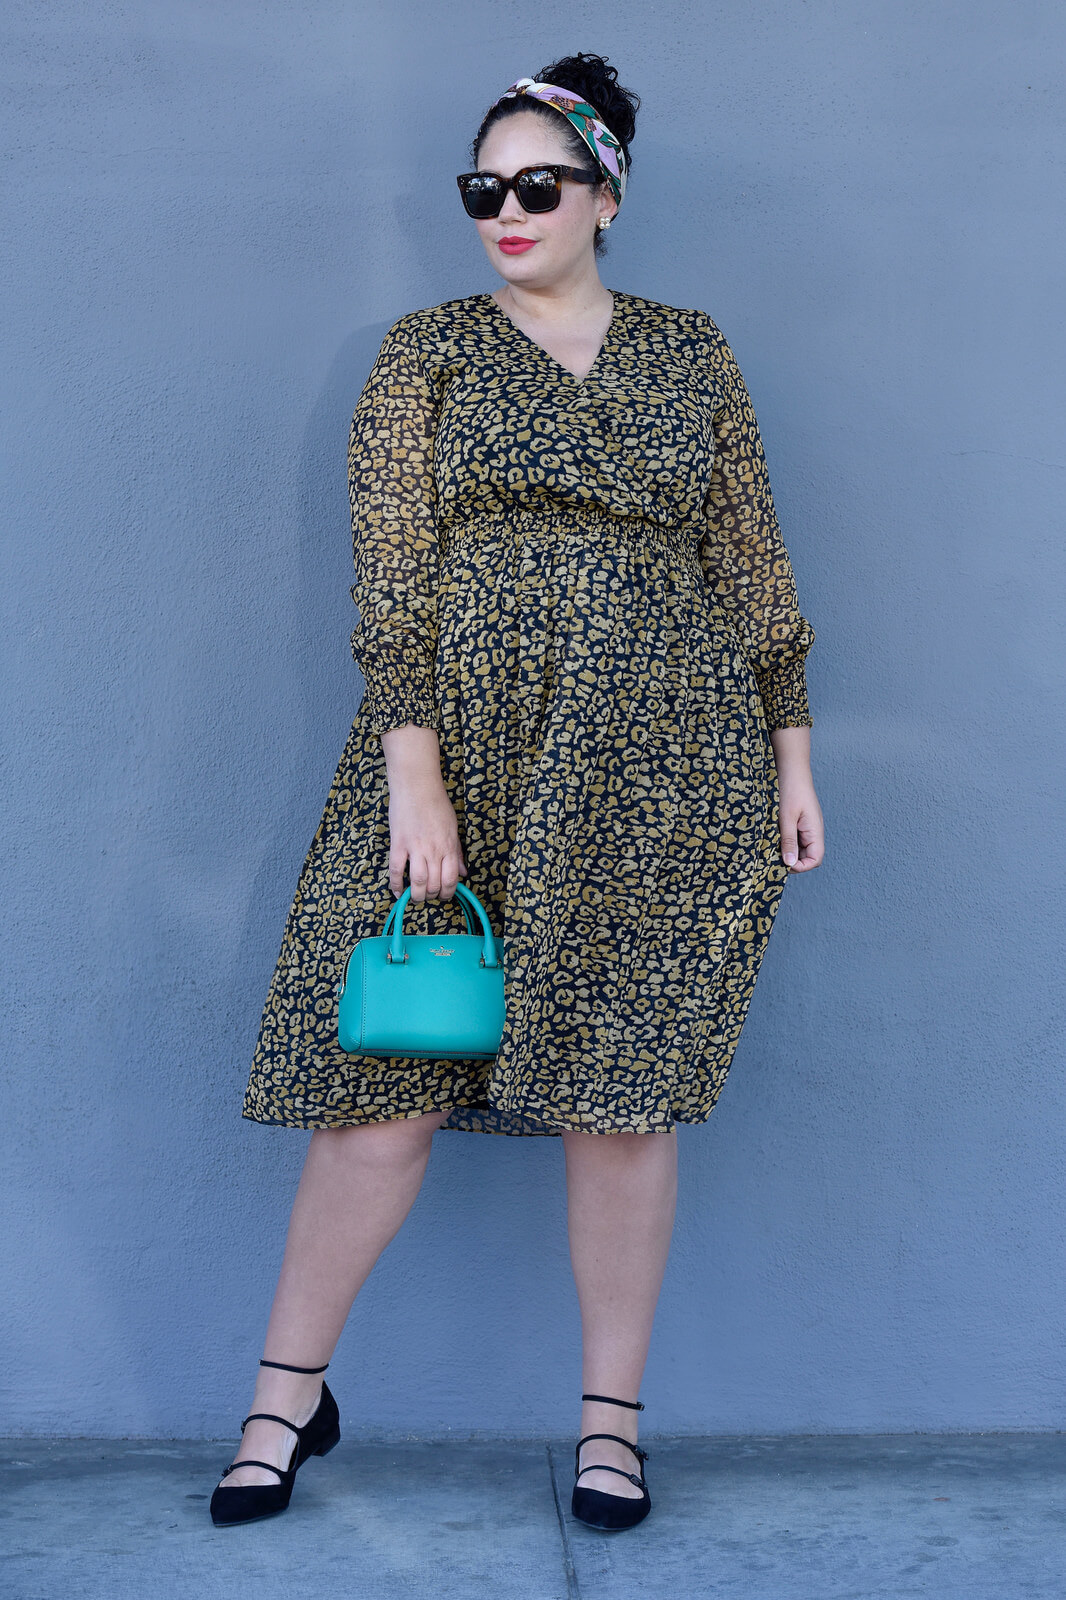 Featuring Leapord Print Long Sleave Dress By Whowhatwear, Bag By Kate Spade, Sunglasses By Celine, Shoes By Stuart Weitzman And A Headband via @GirlWithCurves